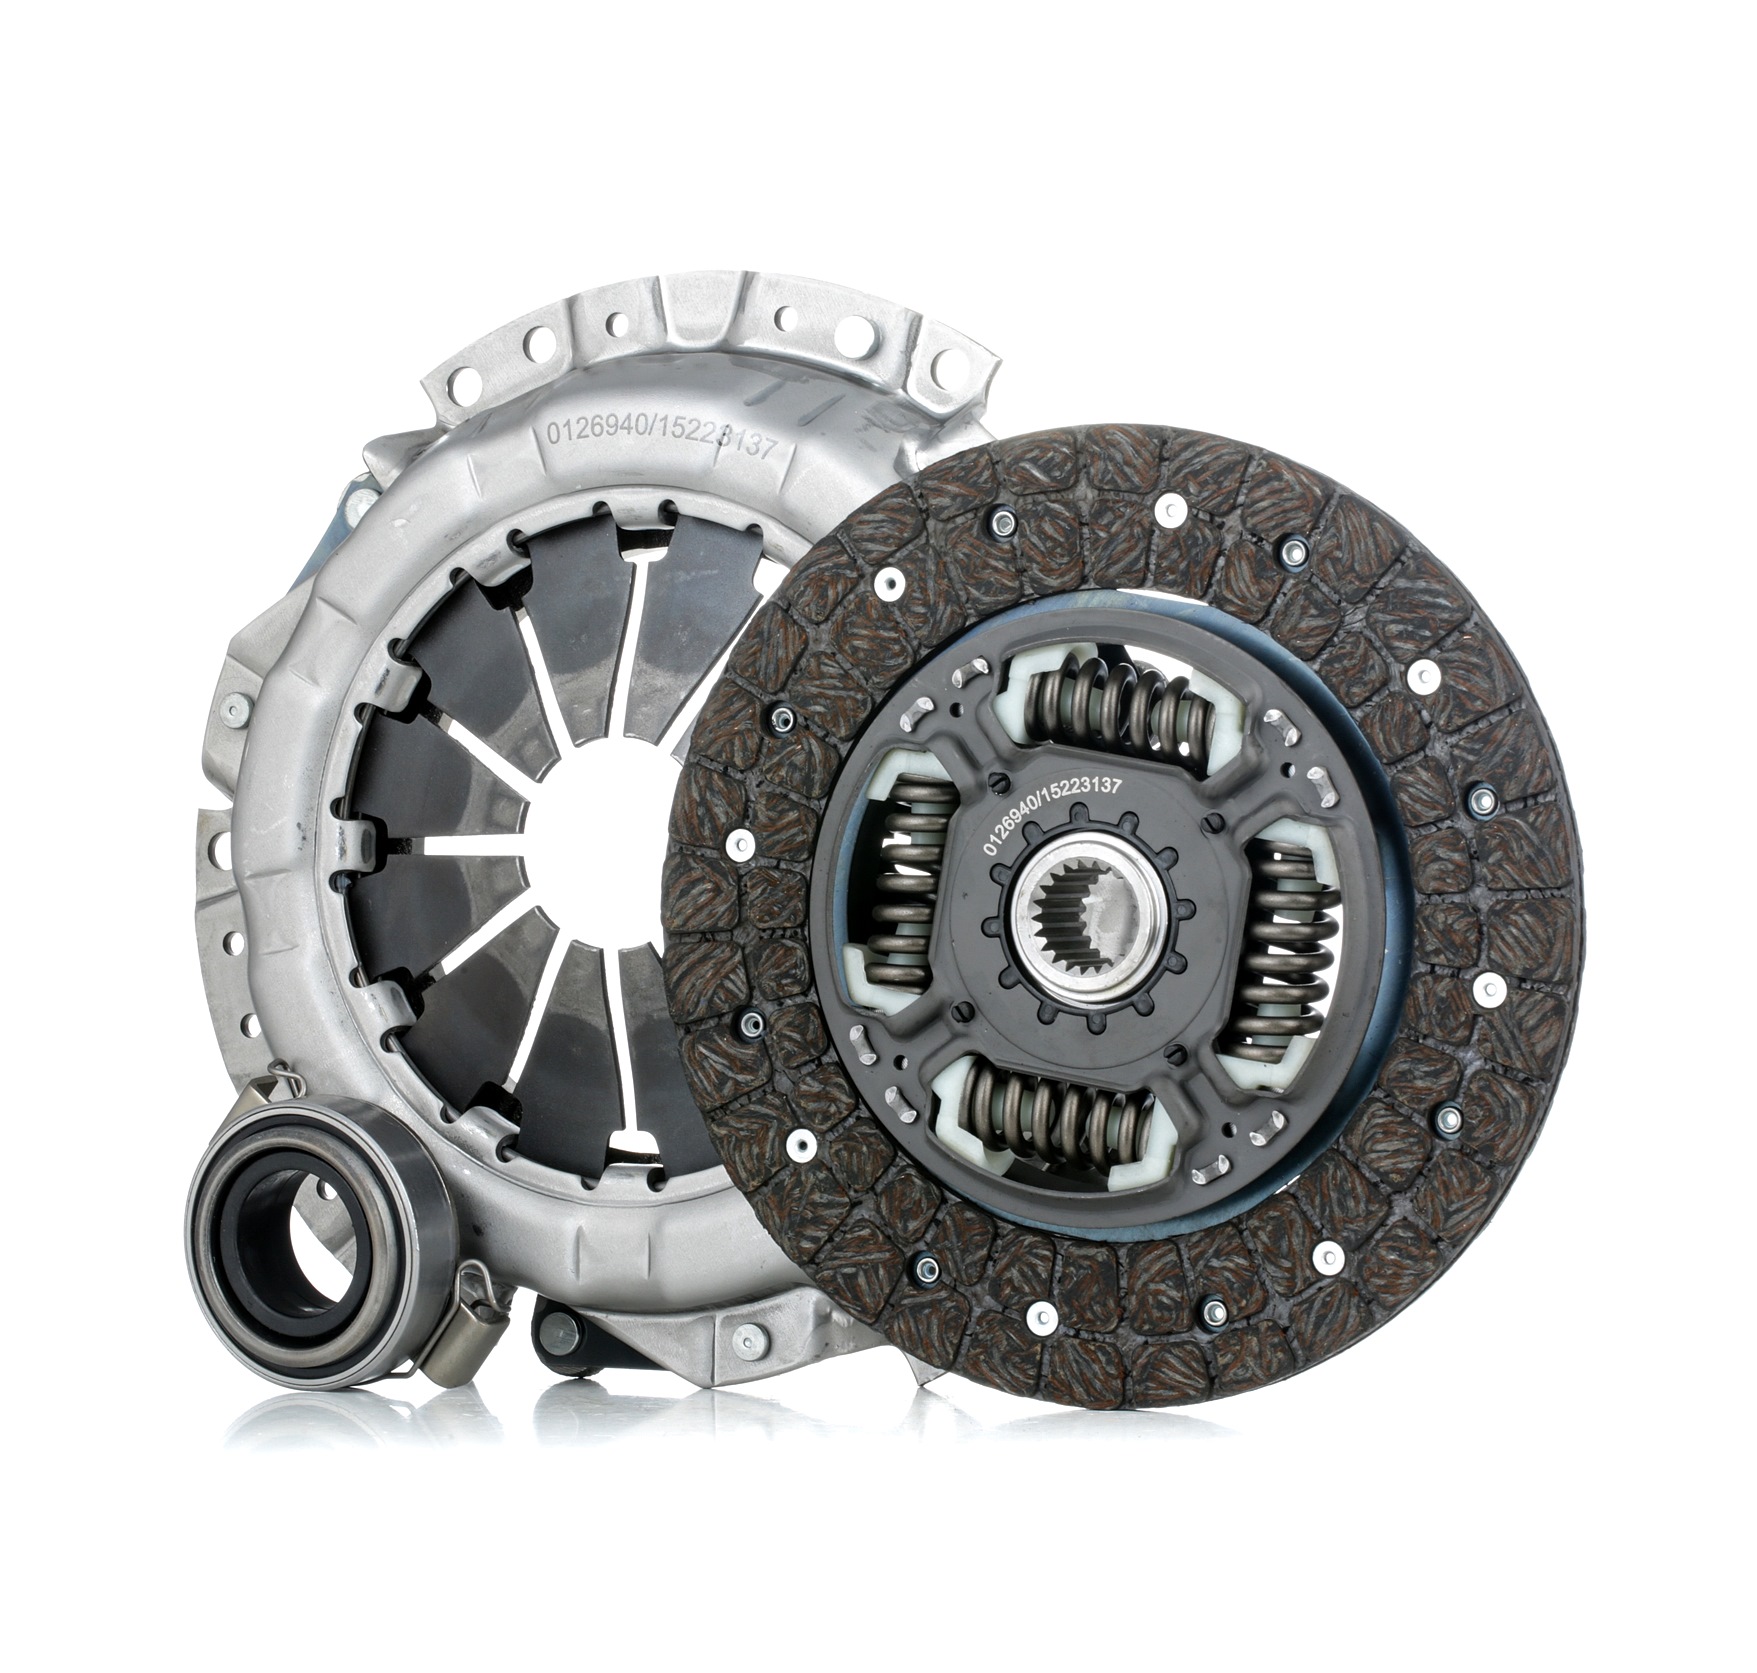 SKCK-0100398 STARK Clutch set MINI three-piece, with clutch release bearing, with clutch disc, 210mm